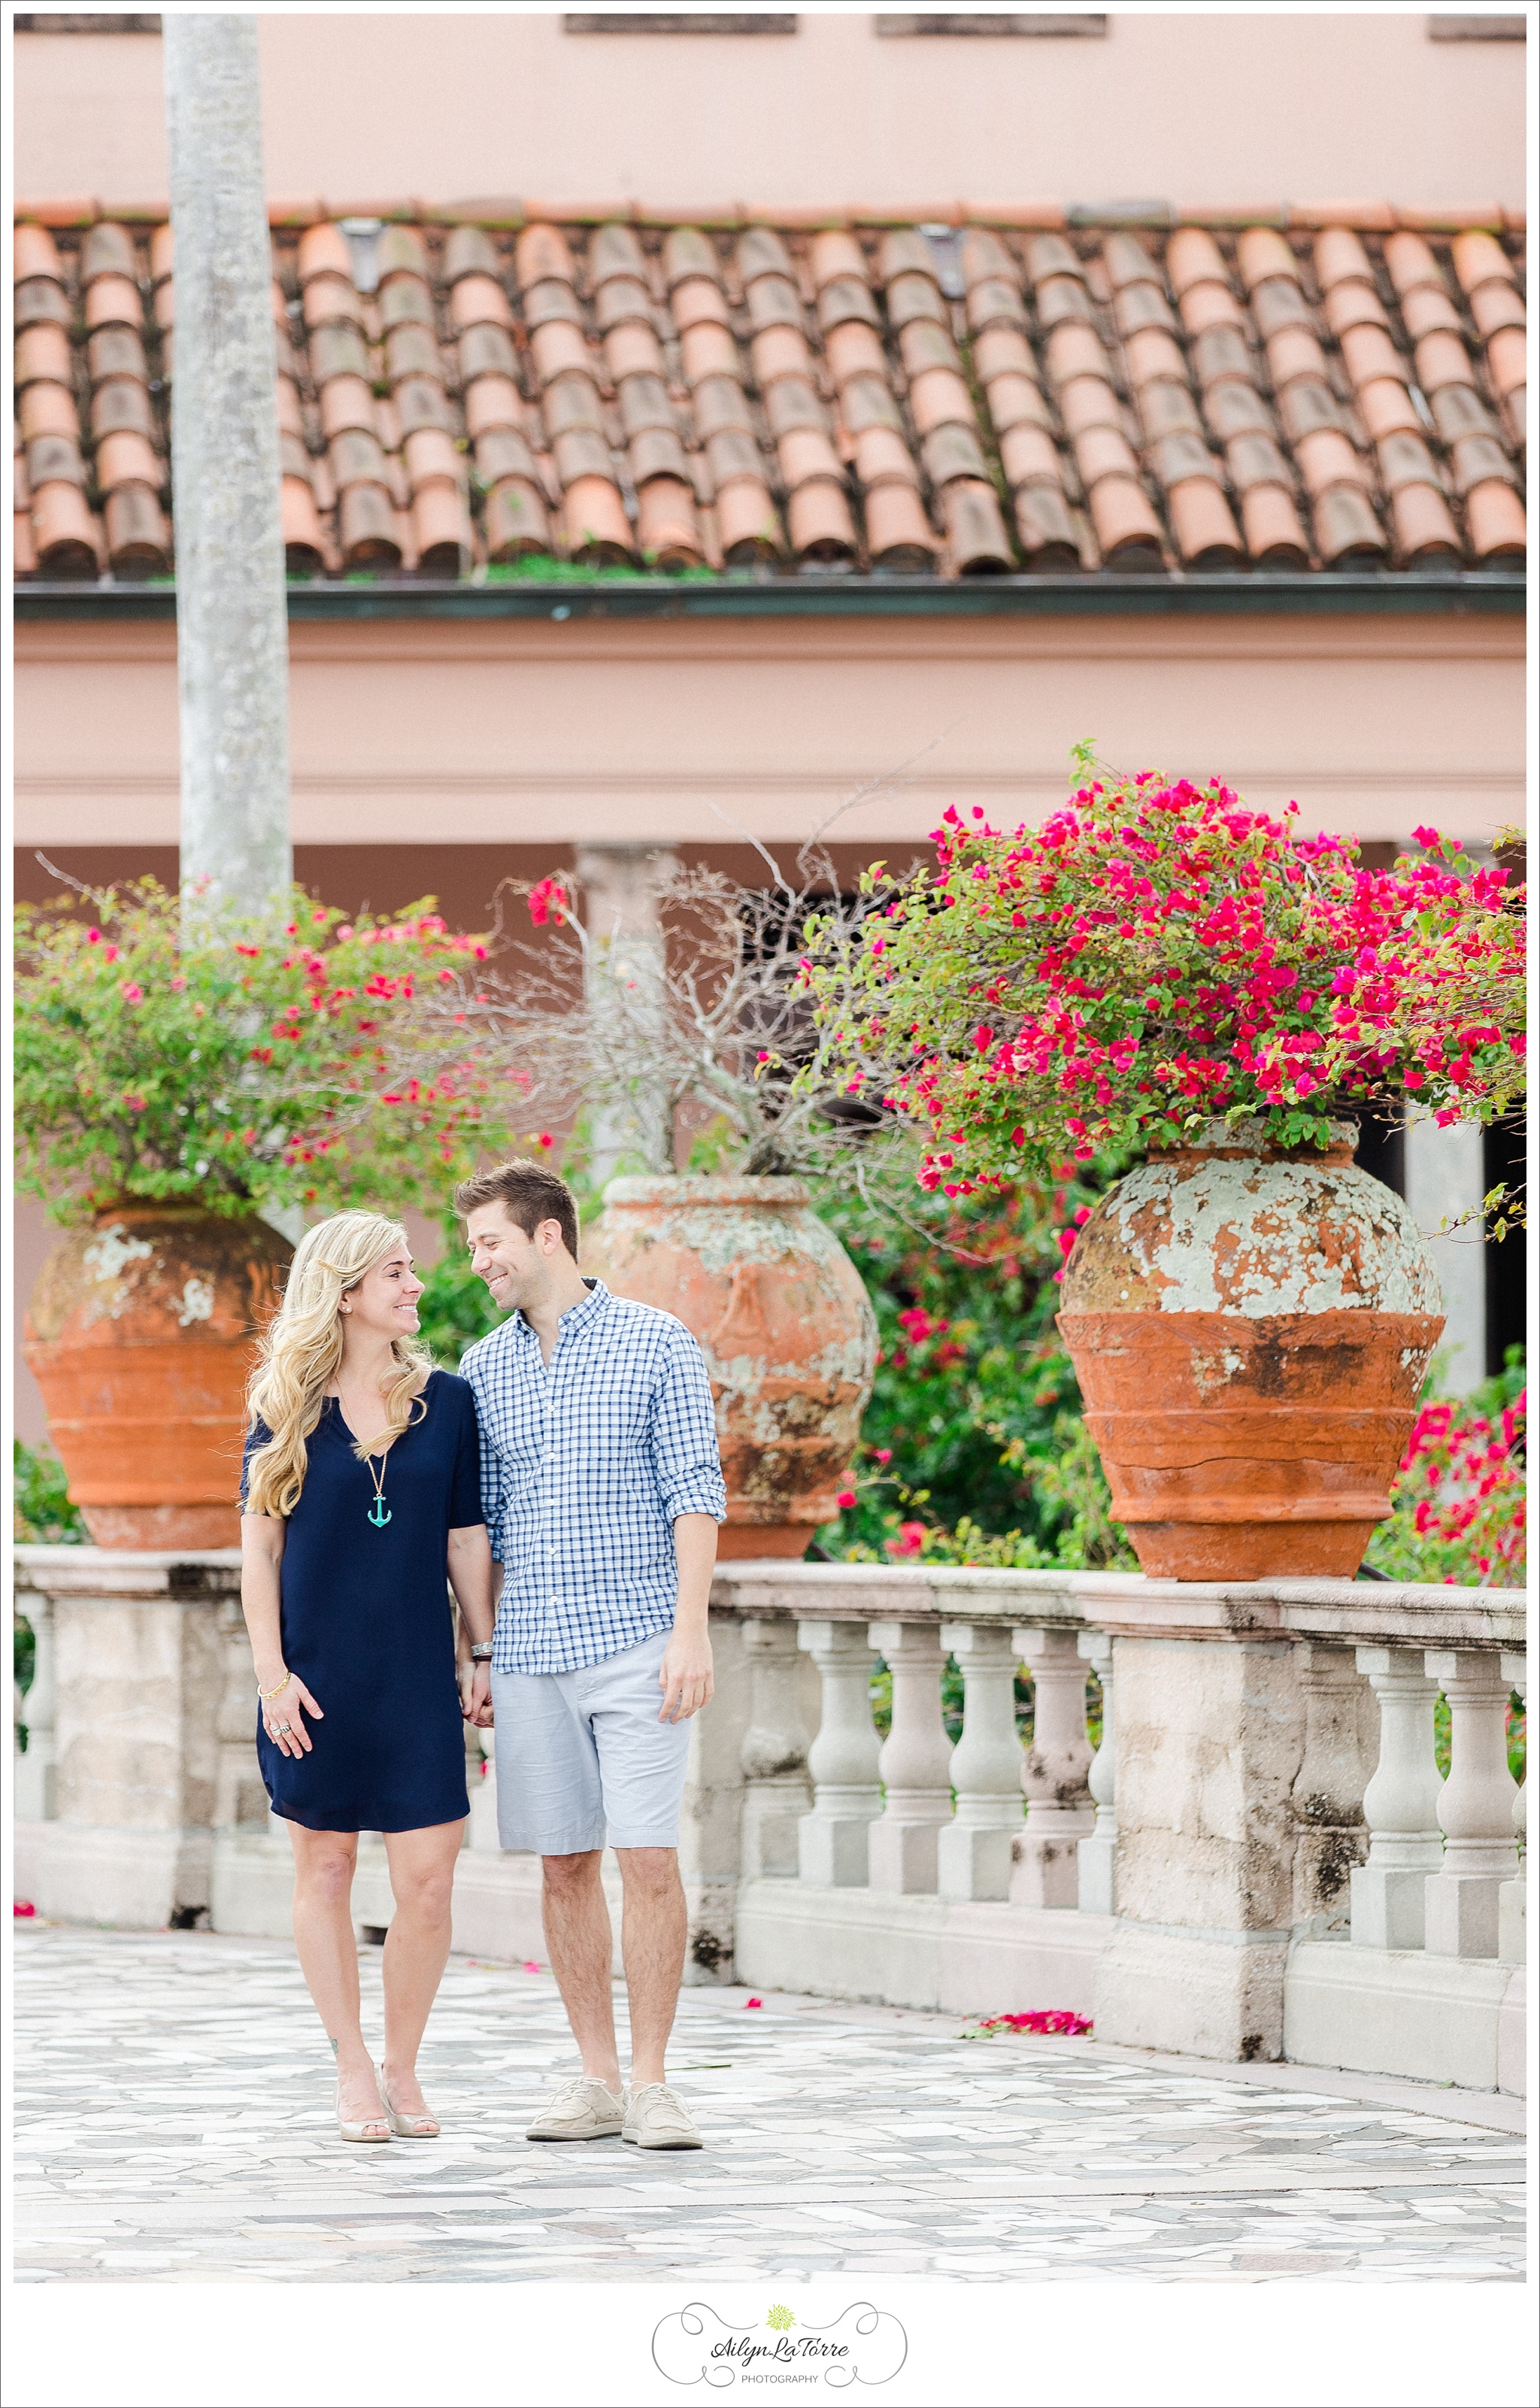 Ringling Museum Engagement | © Ailyn La Torre Photography 2014